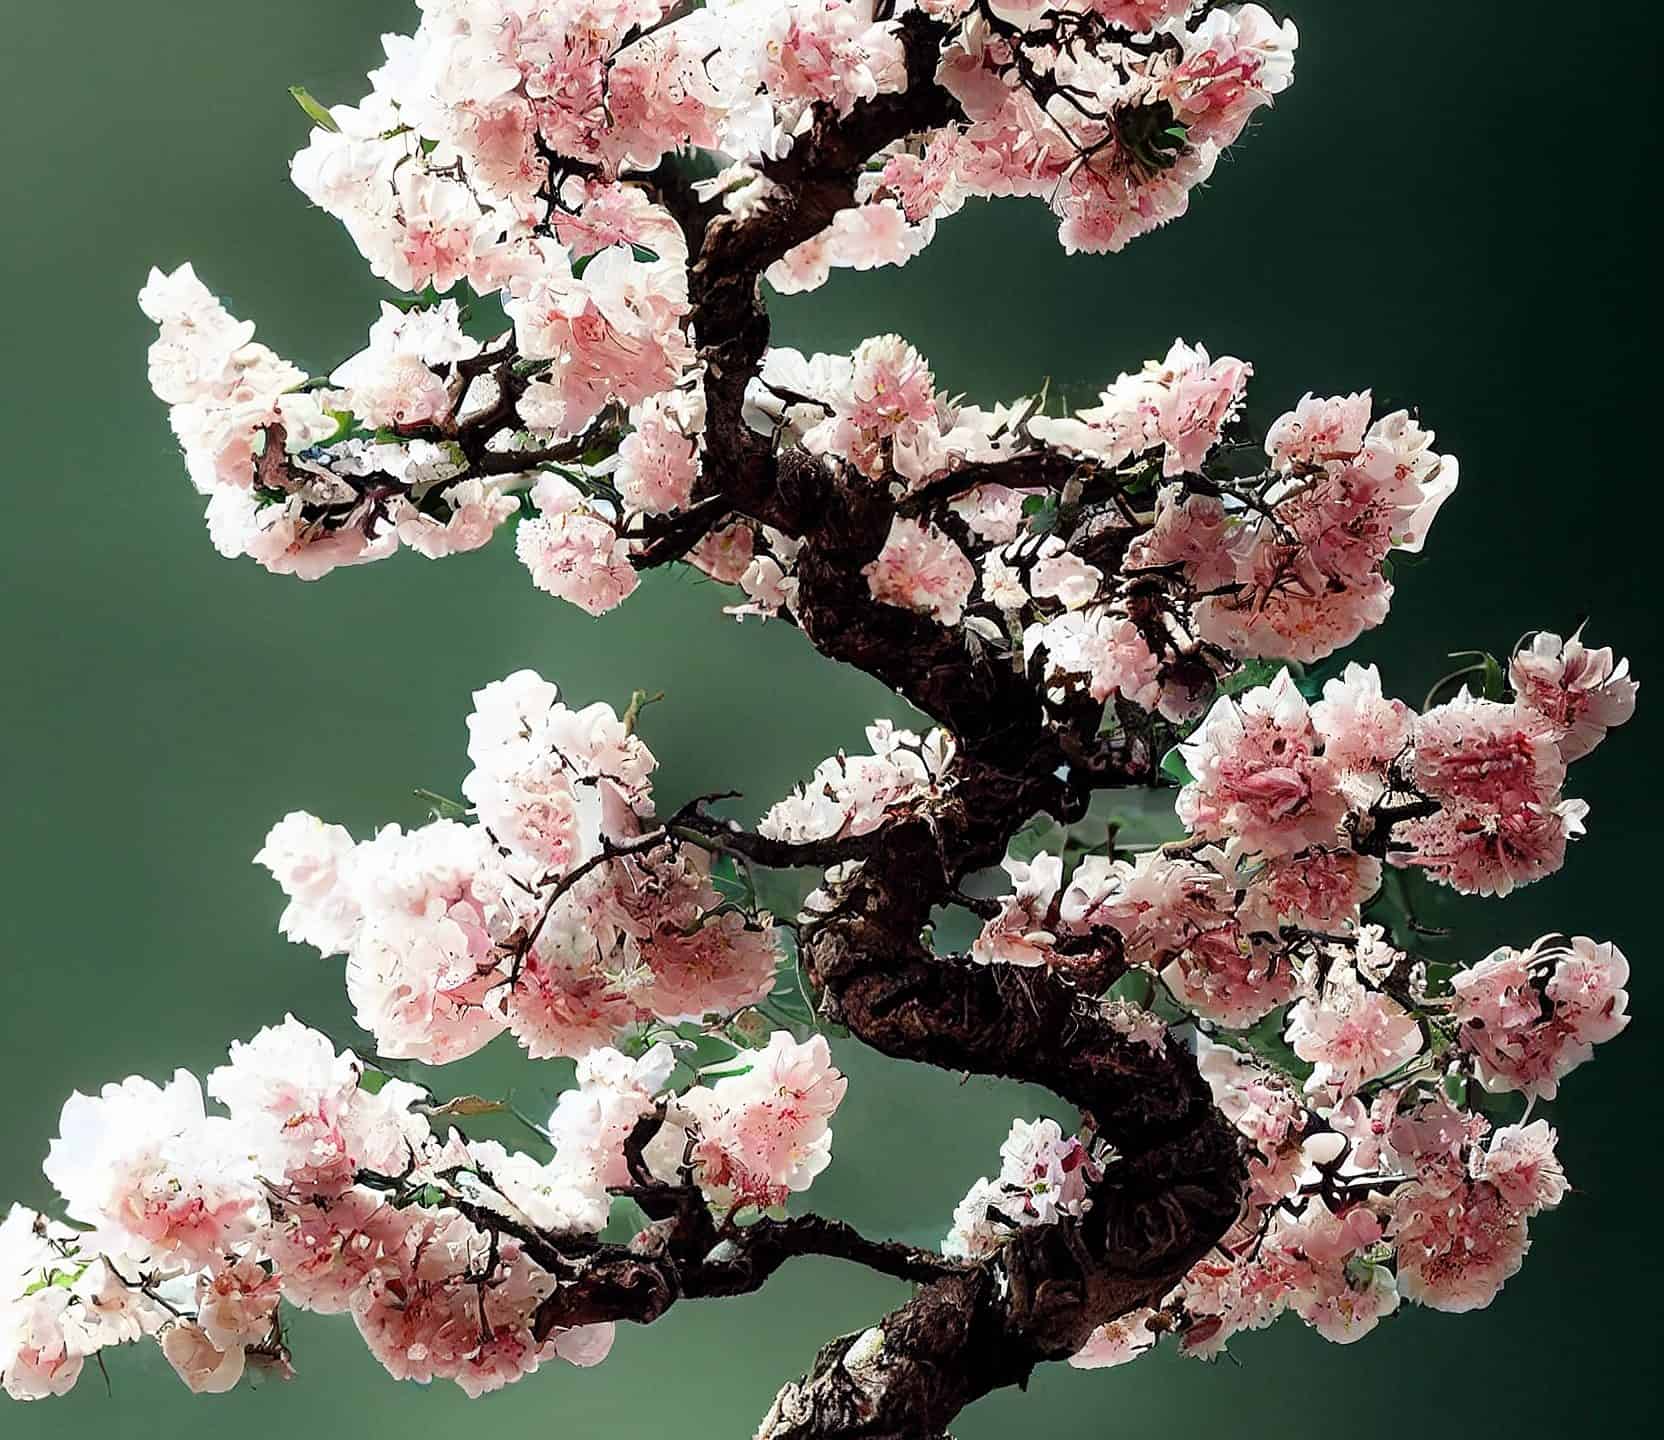 Pale pink blossoms on cherry blossom bonsai